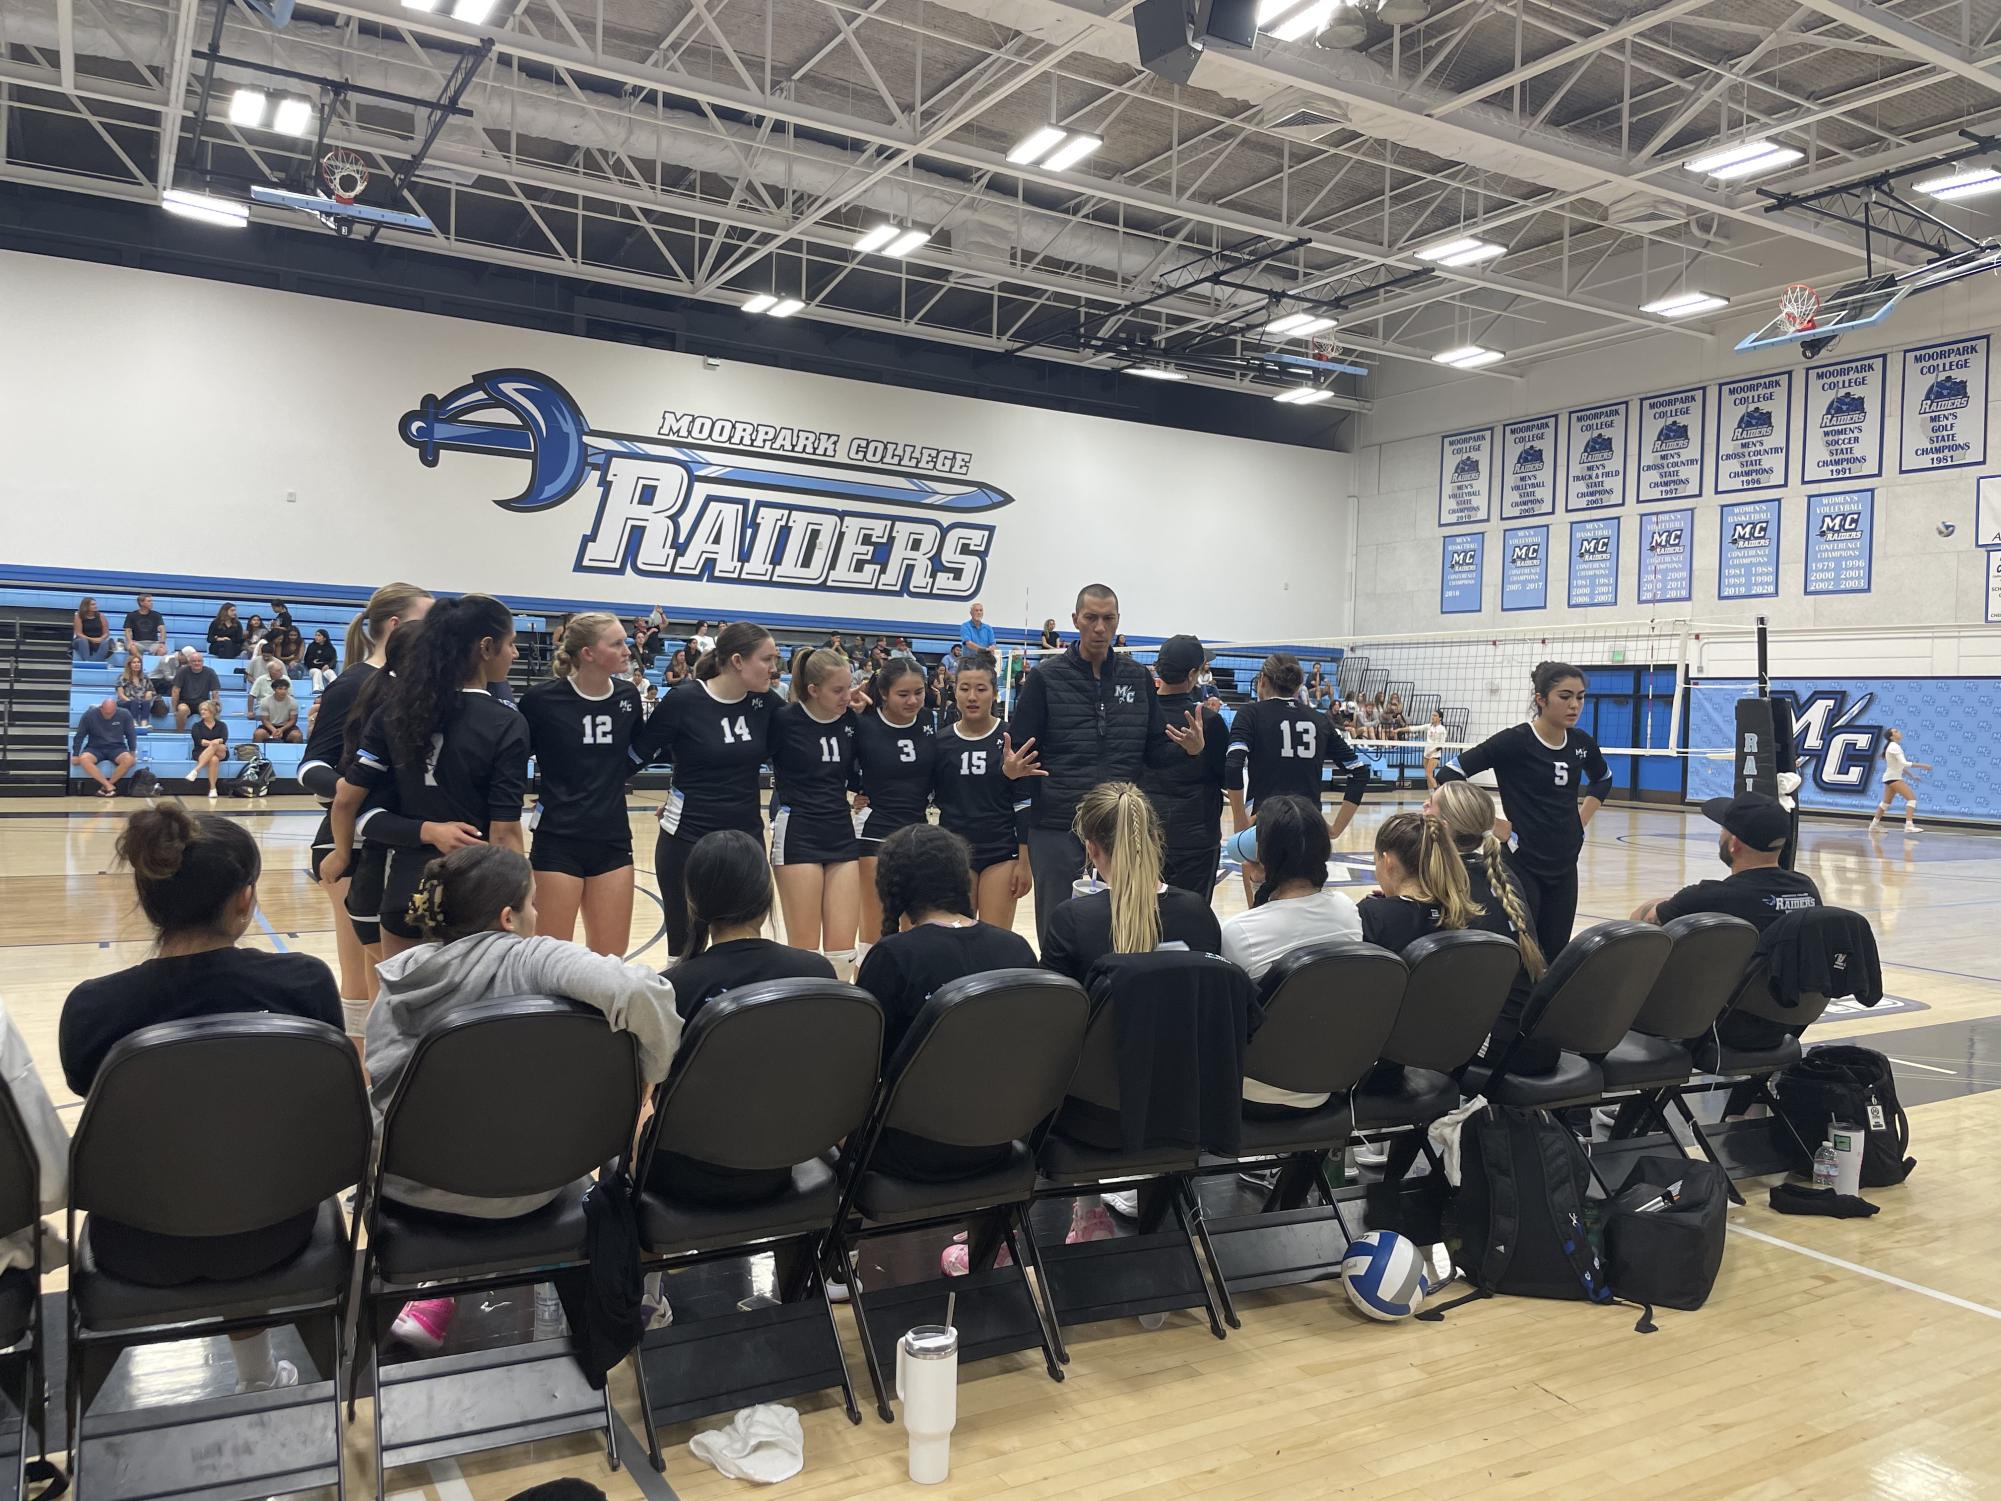 The Moorpark College women's volleyball team use time in between sets to discuss plays as they take on cross-town rivals, the Ventura College Pirates. The Raiders would go on to defeat the Pirates, 4-1, in the Raider Gymnasium.